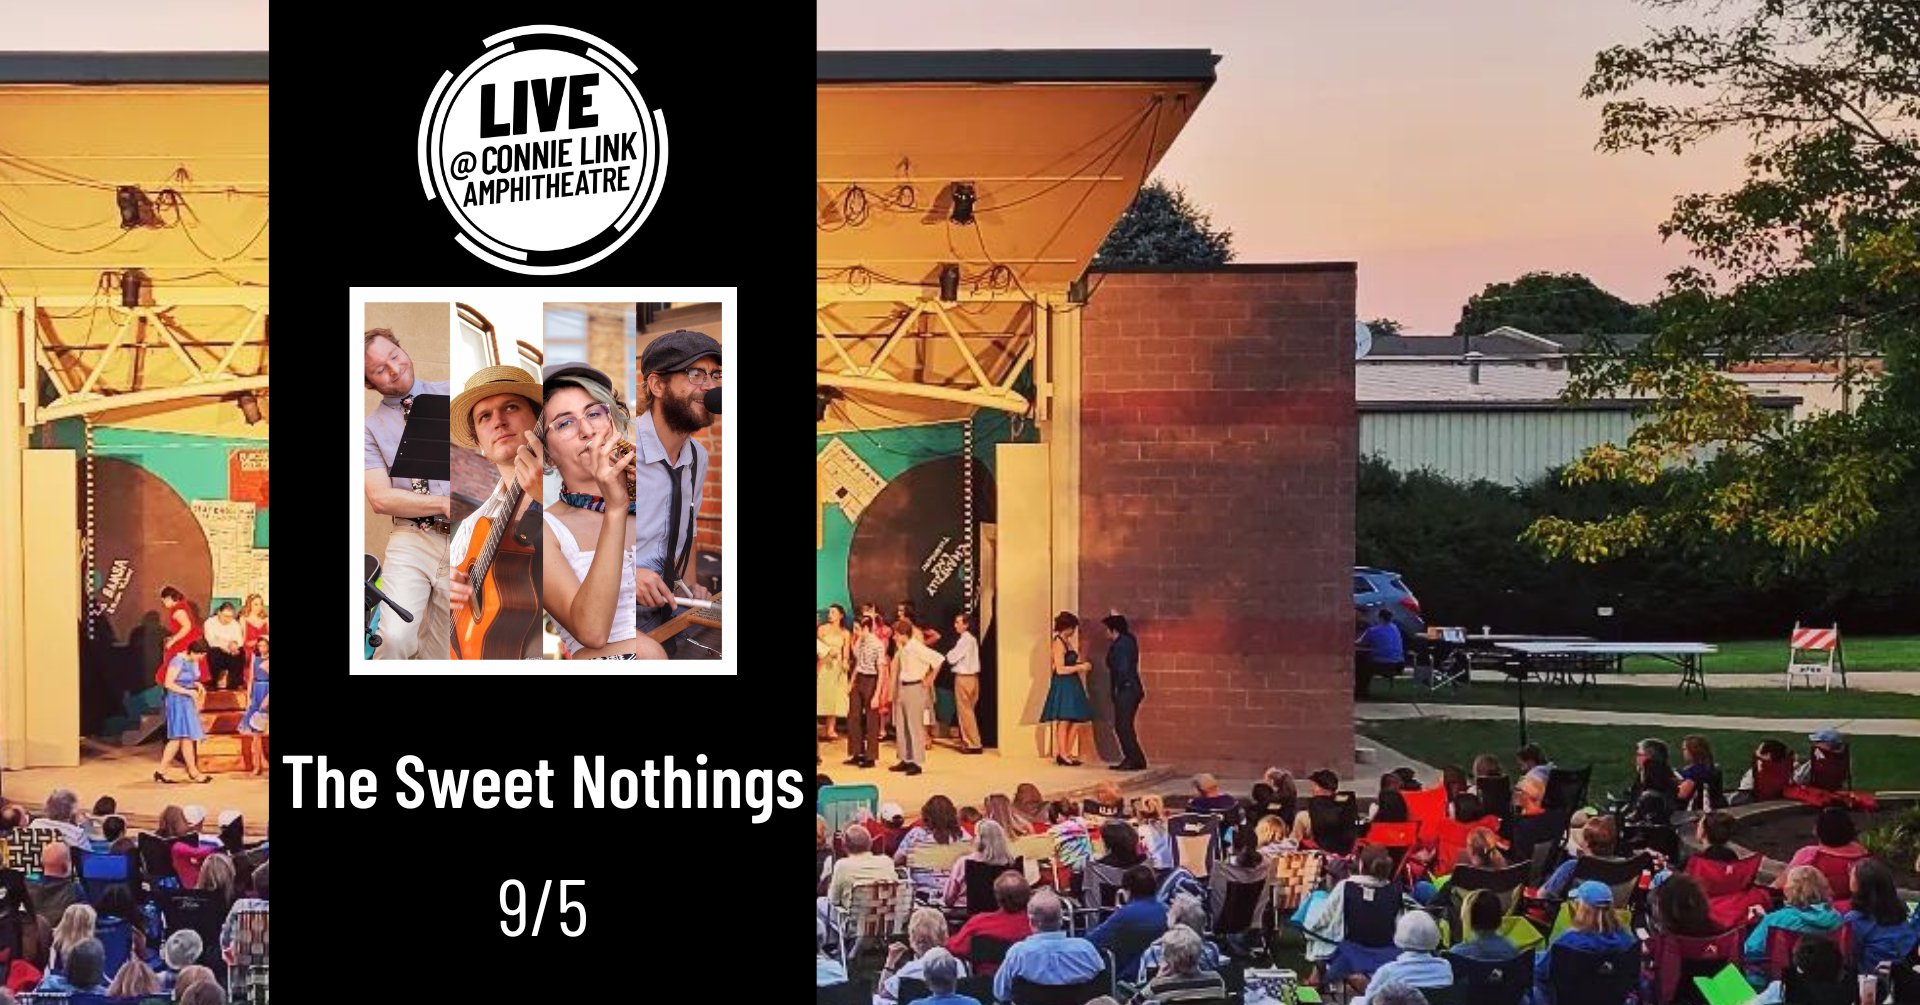 Normal LIVE presents The Sweet Nothings @ Connie Link Amphitheatre